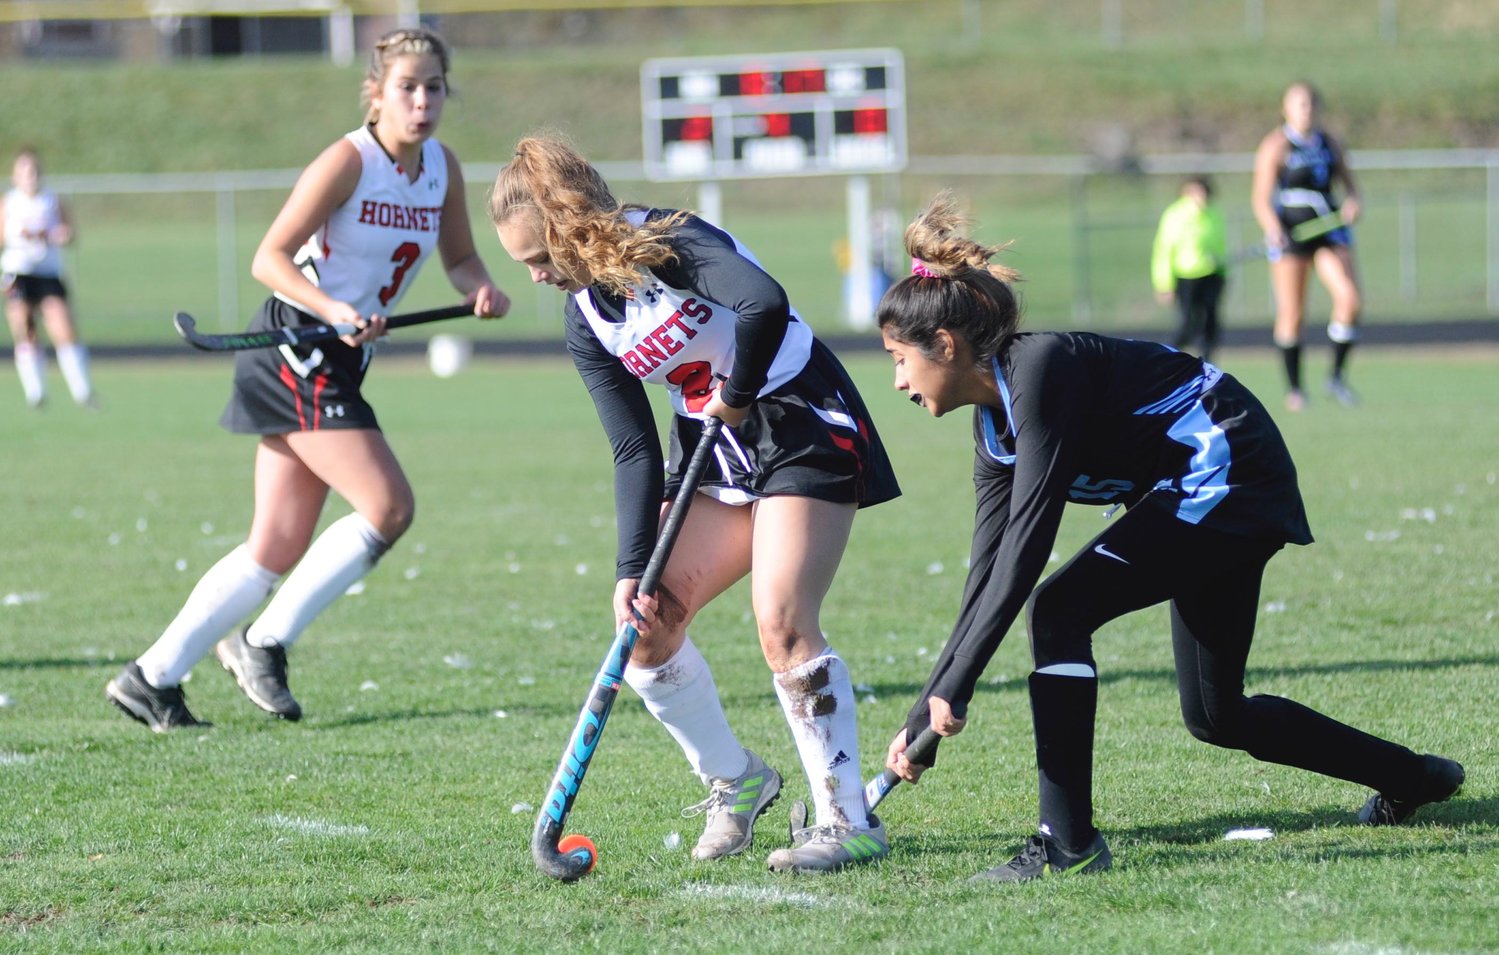 Getting a stick on it. Honesdale’s Jillian Hoey and Wilkes Barre’s Melanie Teletenchi vie for possession, as Hornets' Brynn McGinnis anticipates the handoff.